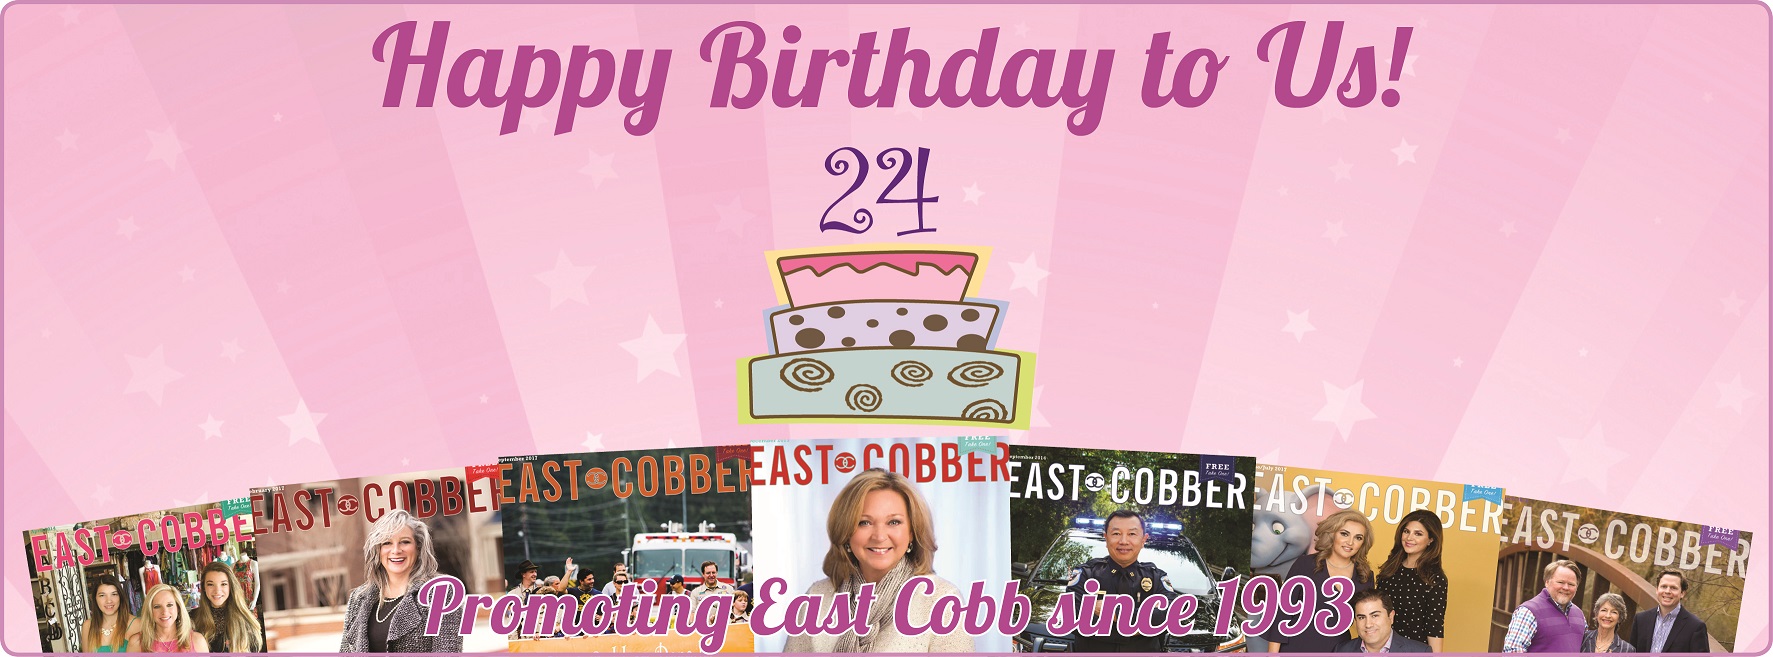 Publisher’s Note: Celebrating 24 Years of Promoting East Cobb!